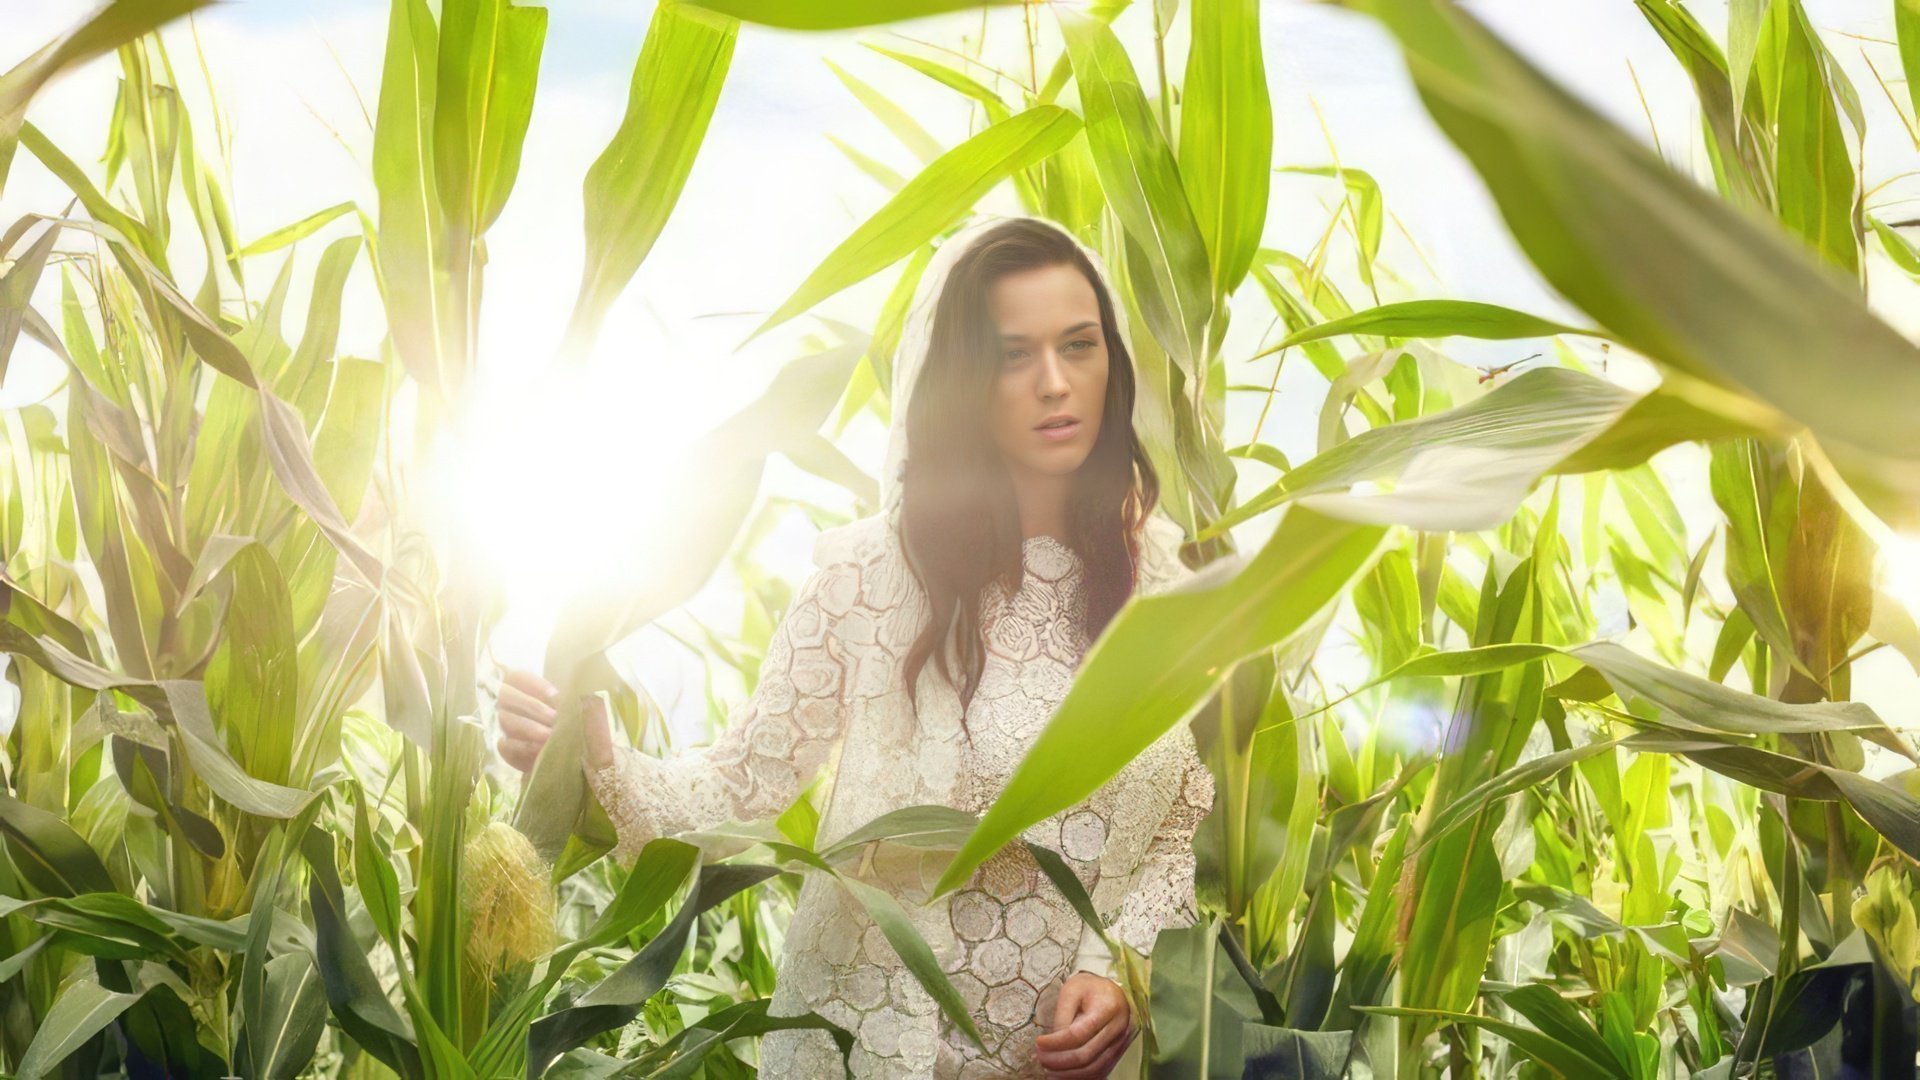 The album 'Prism' opened a new chapter in the singer's life